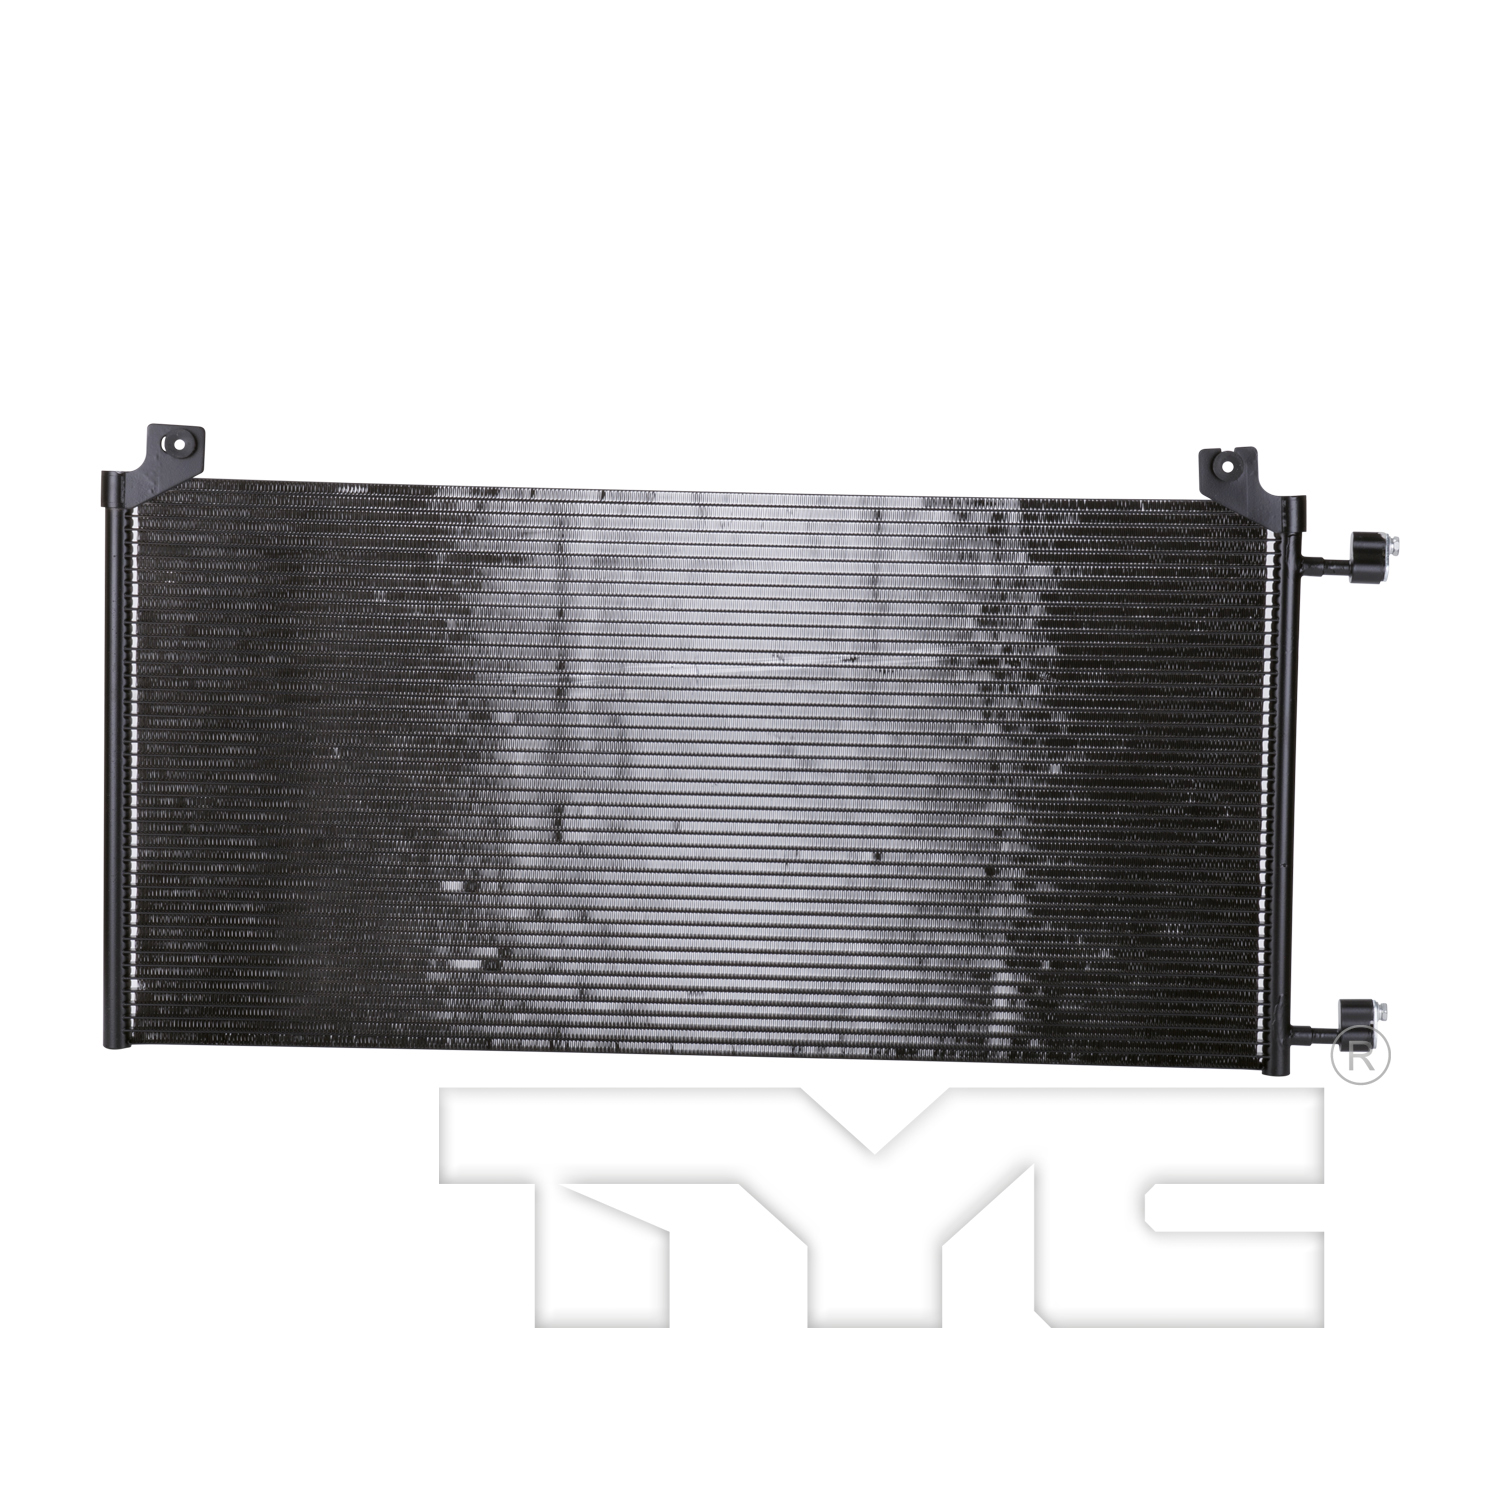 Aftermarket AC CONDENSERS for CHEVROLET - SUBURBAN 1500, SUBURBAN 1500,00-06,Air conditioning condenser